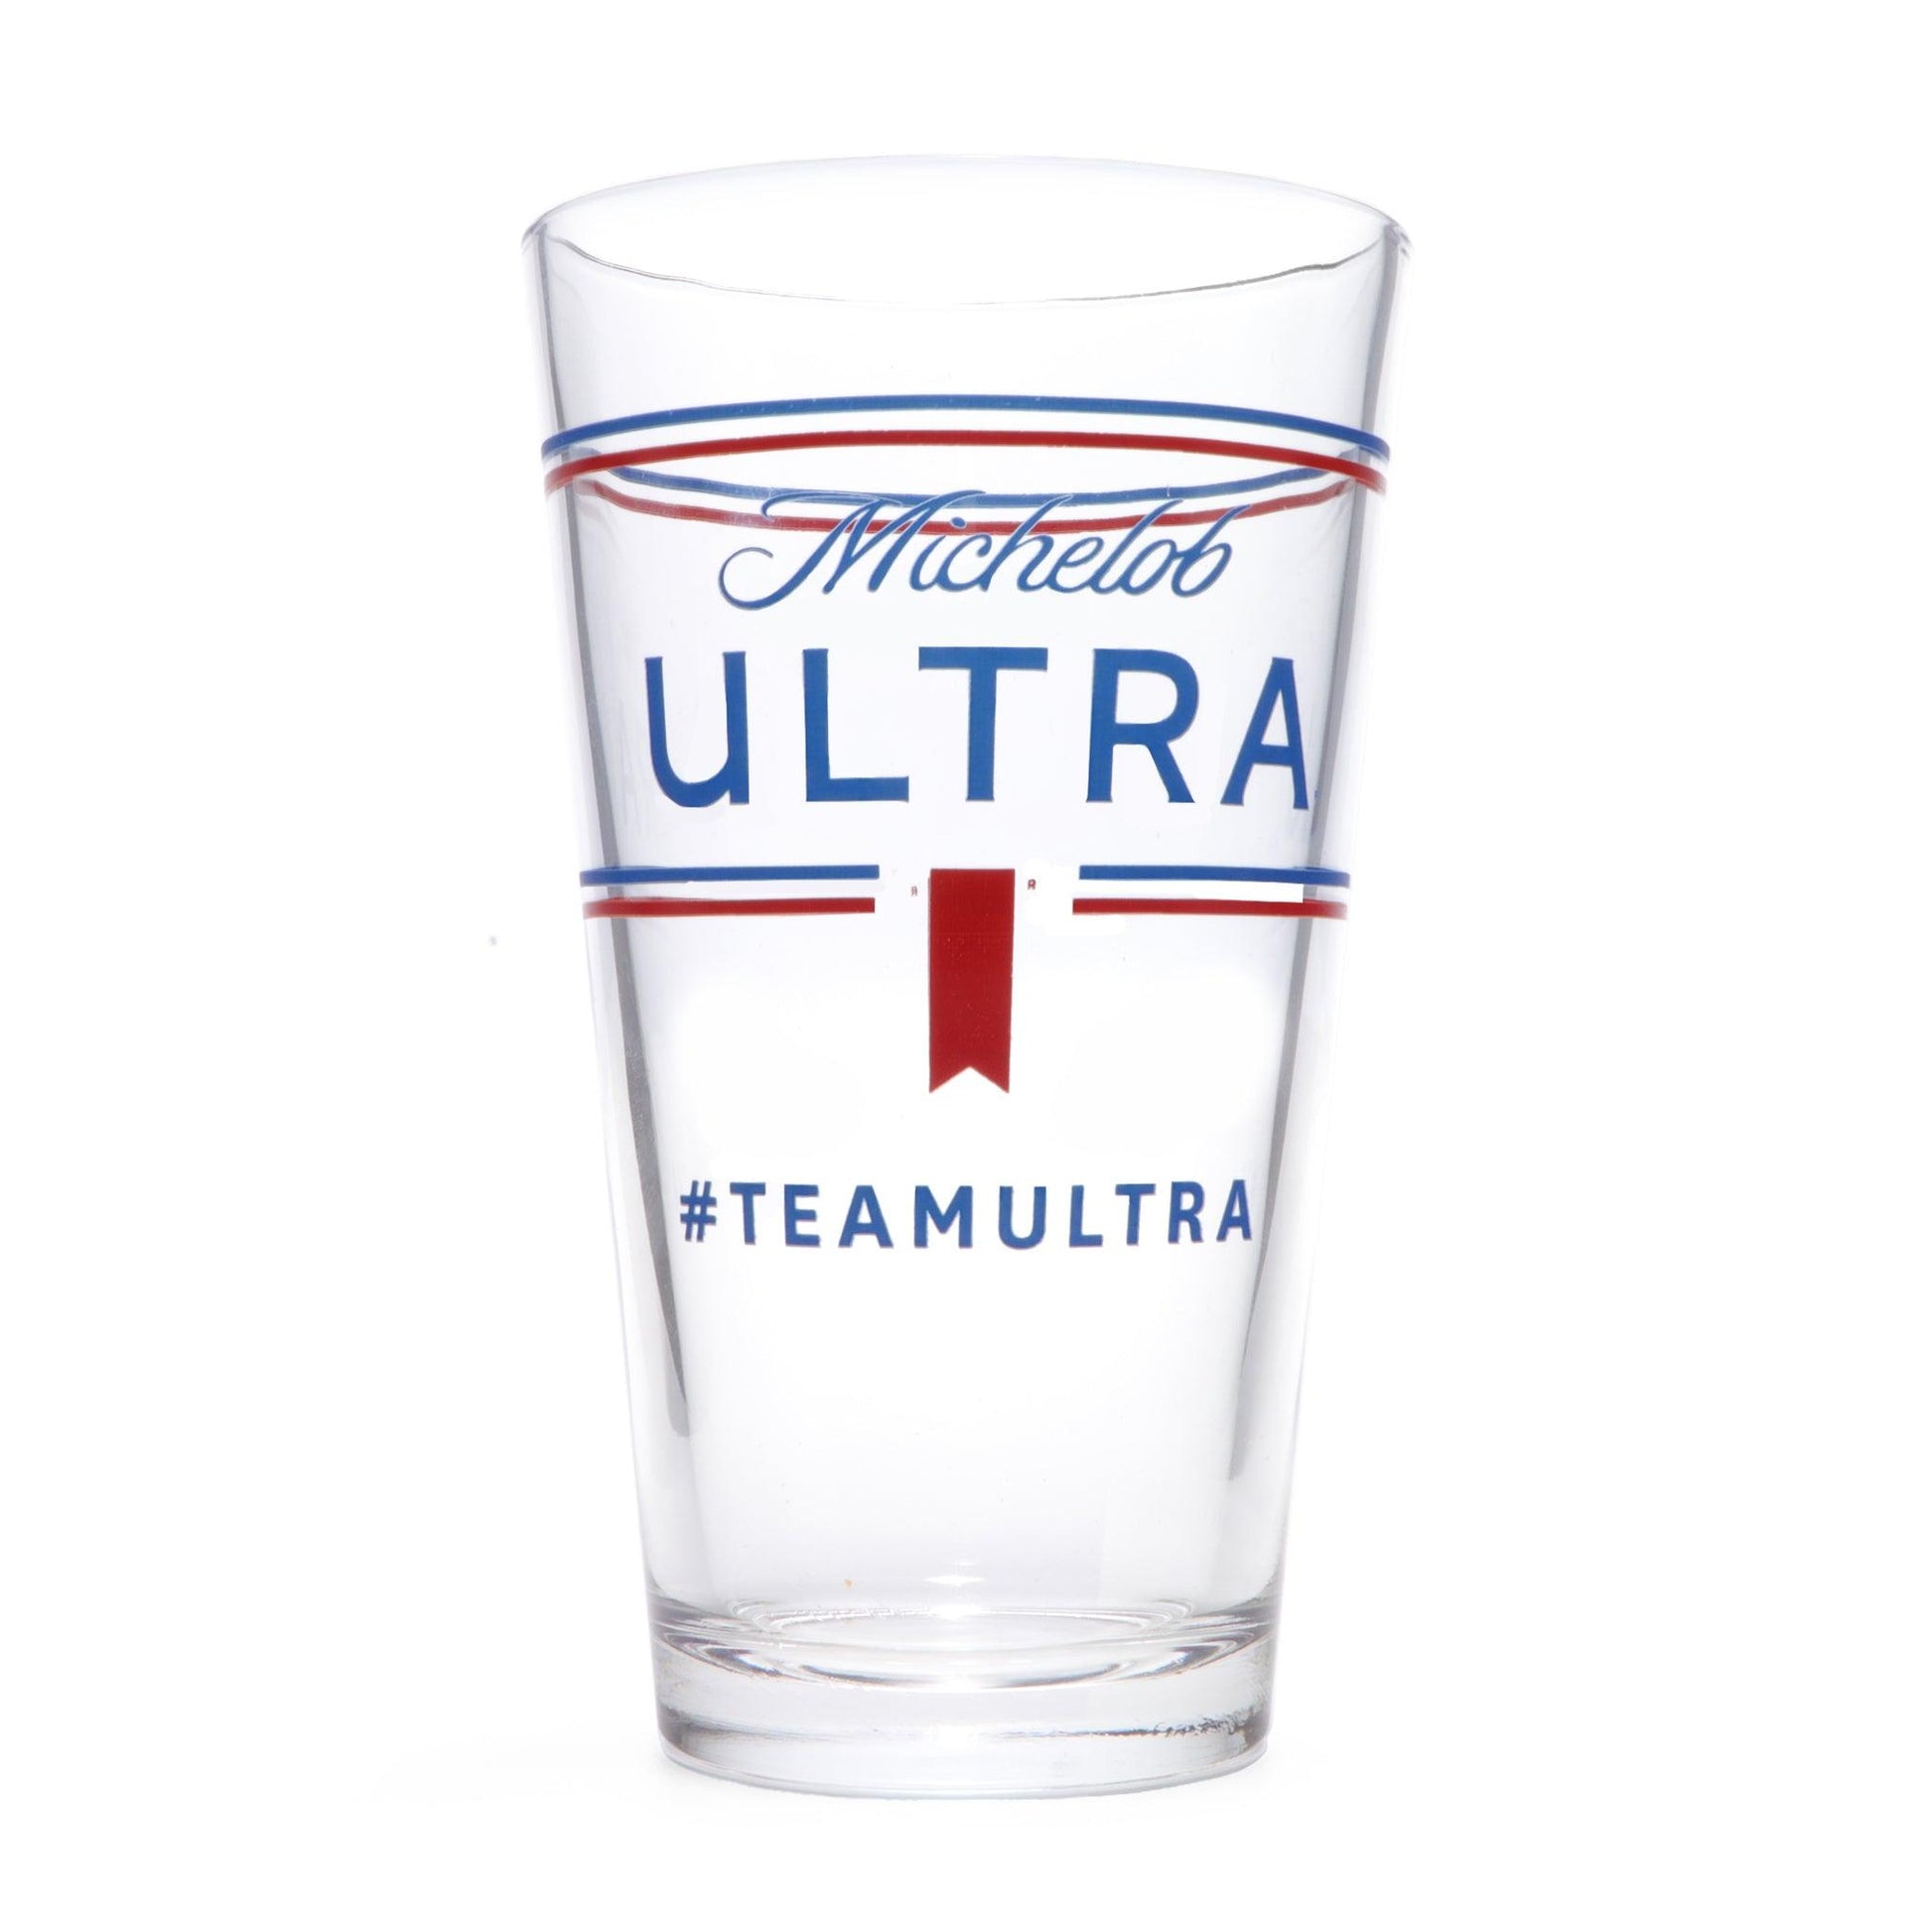 empty 16 oz glass with Michelob ultra logo surrounded by red and blue lines  with #teamultra under 